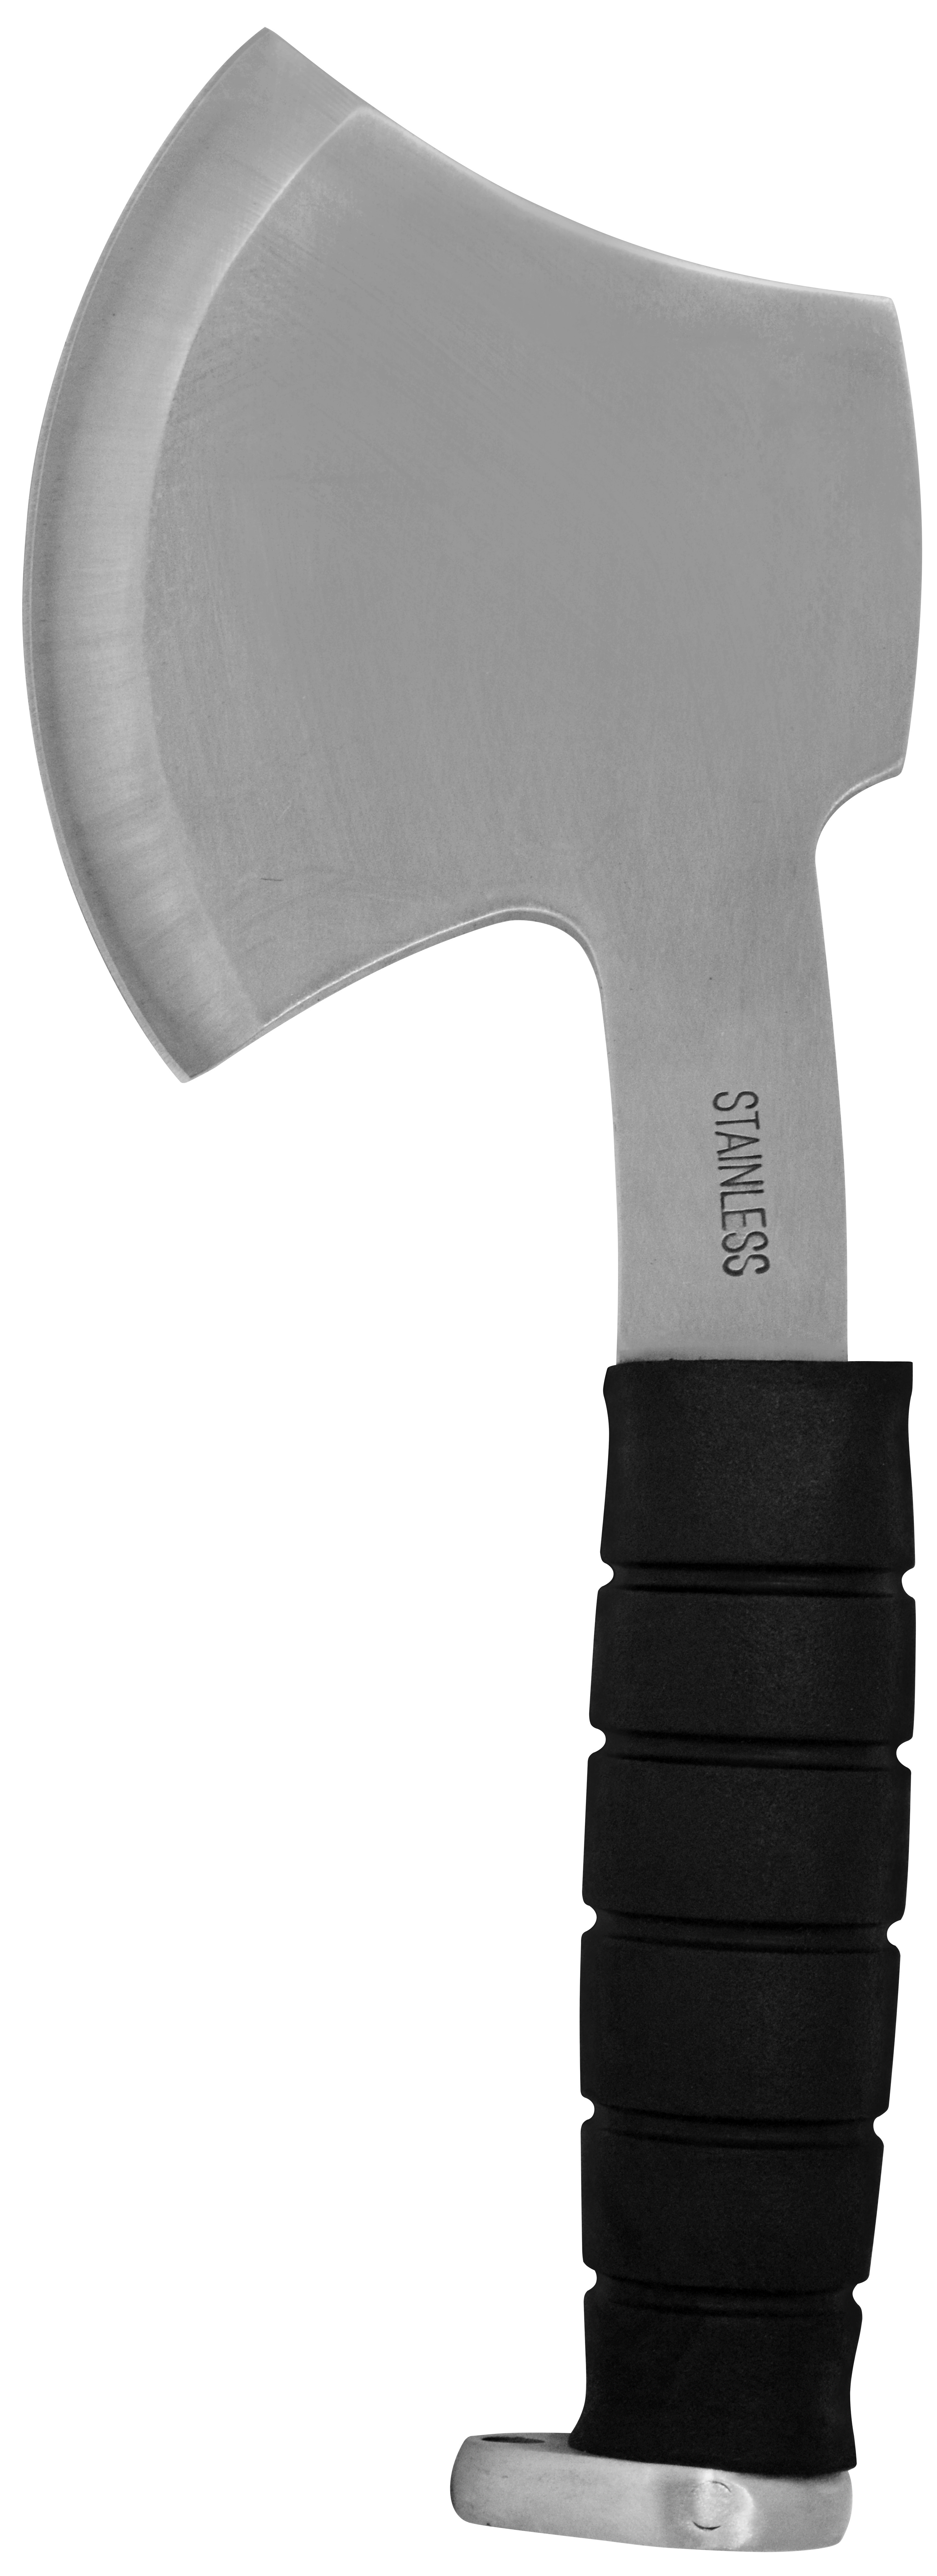 Zenport Axe 14099 Camp Axe, 4-Inch Stainless Steel Blade, Nylon Sheath - Click Image to Close